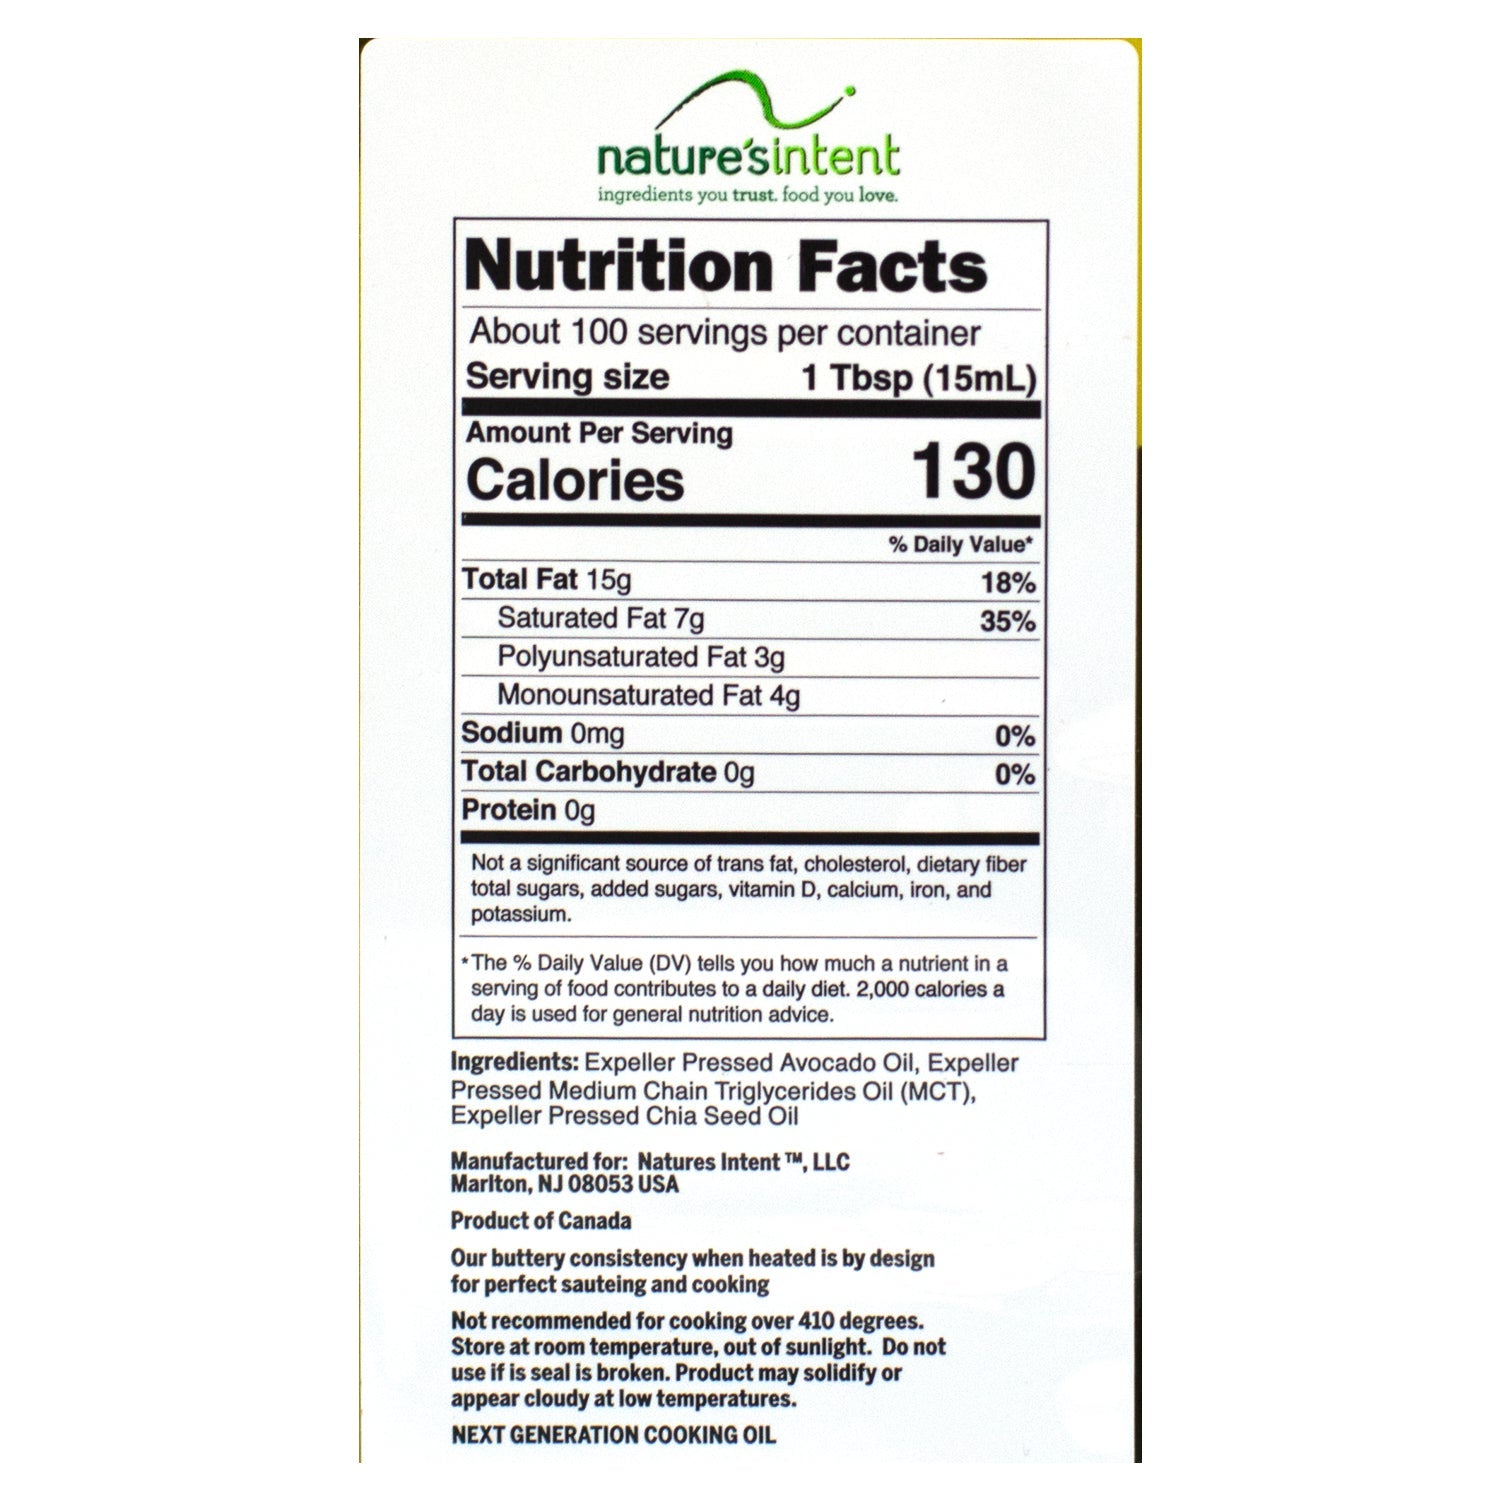 Nature's Intent Avocado, MCT, & Chia All Purpose Cooking Oil Nature's Intent 